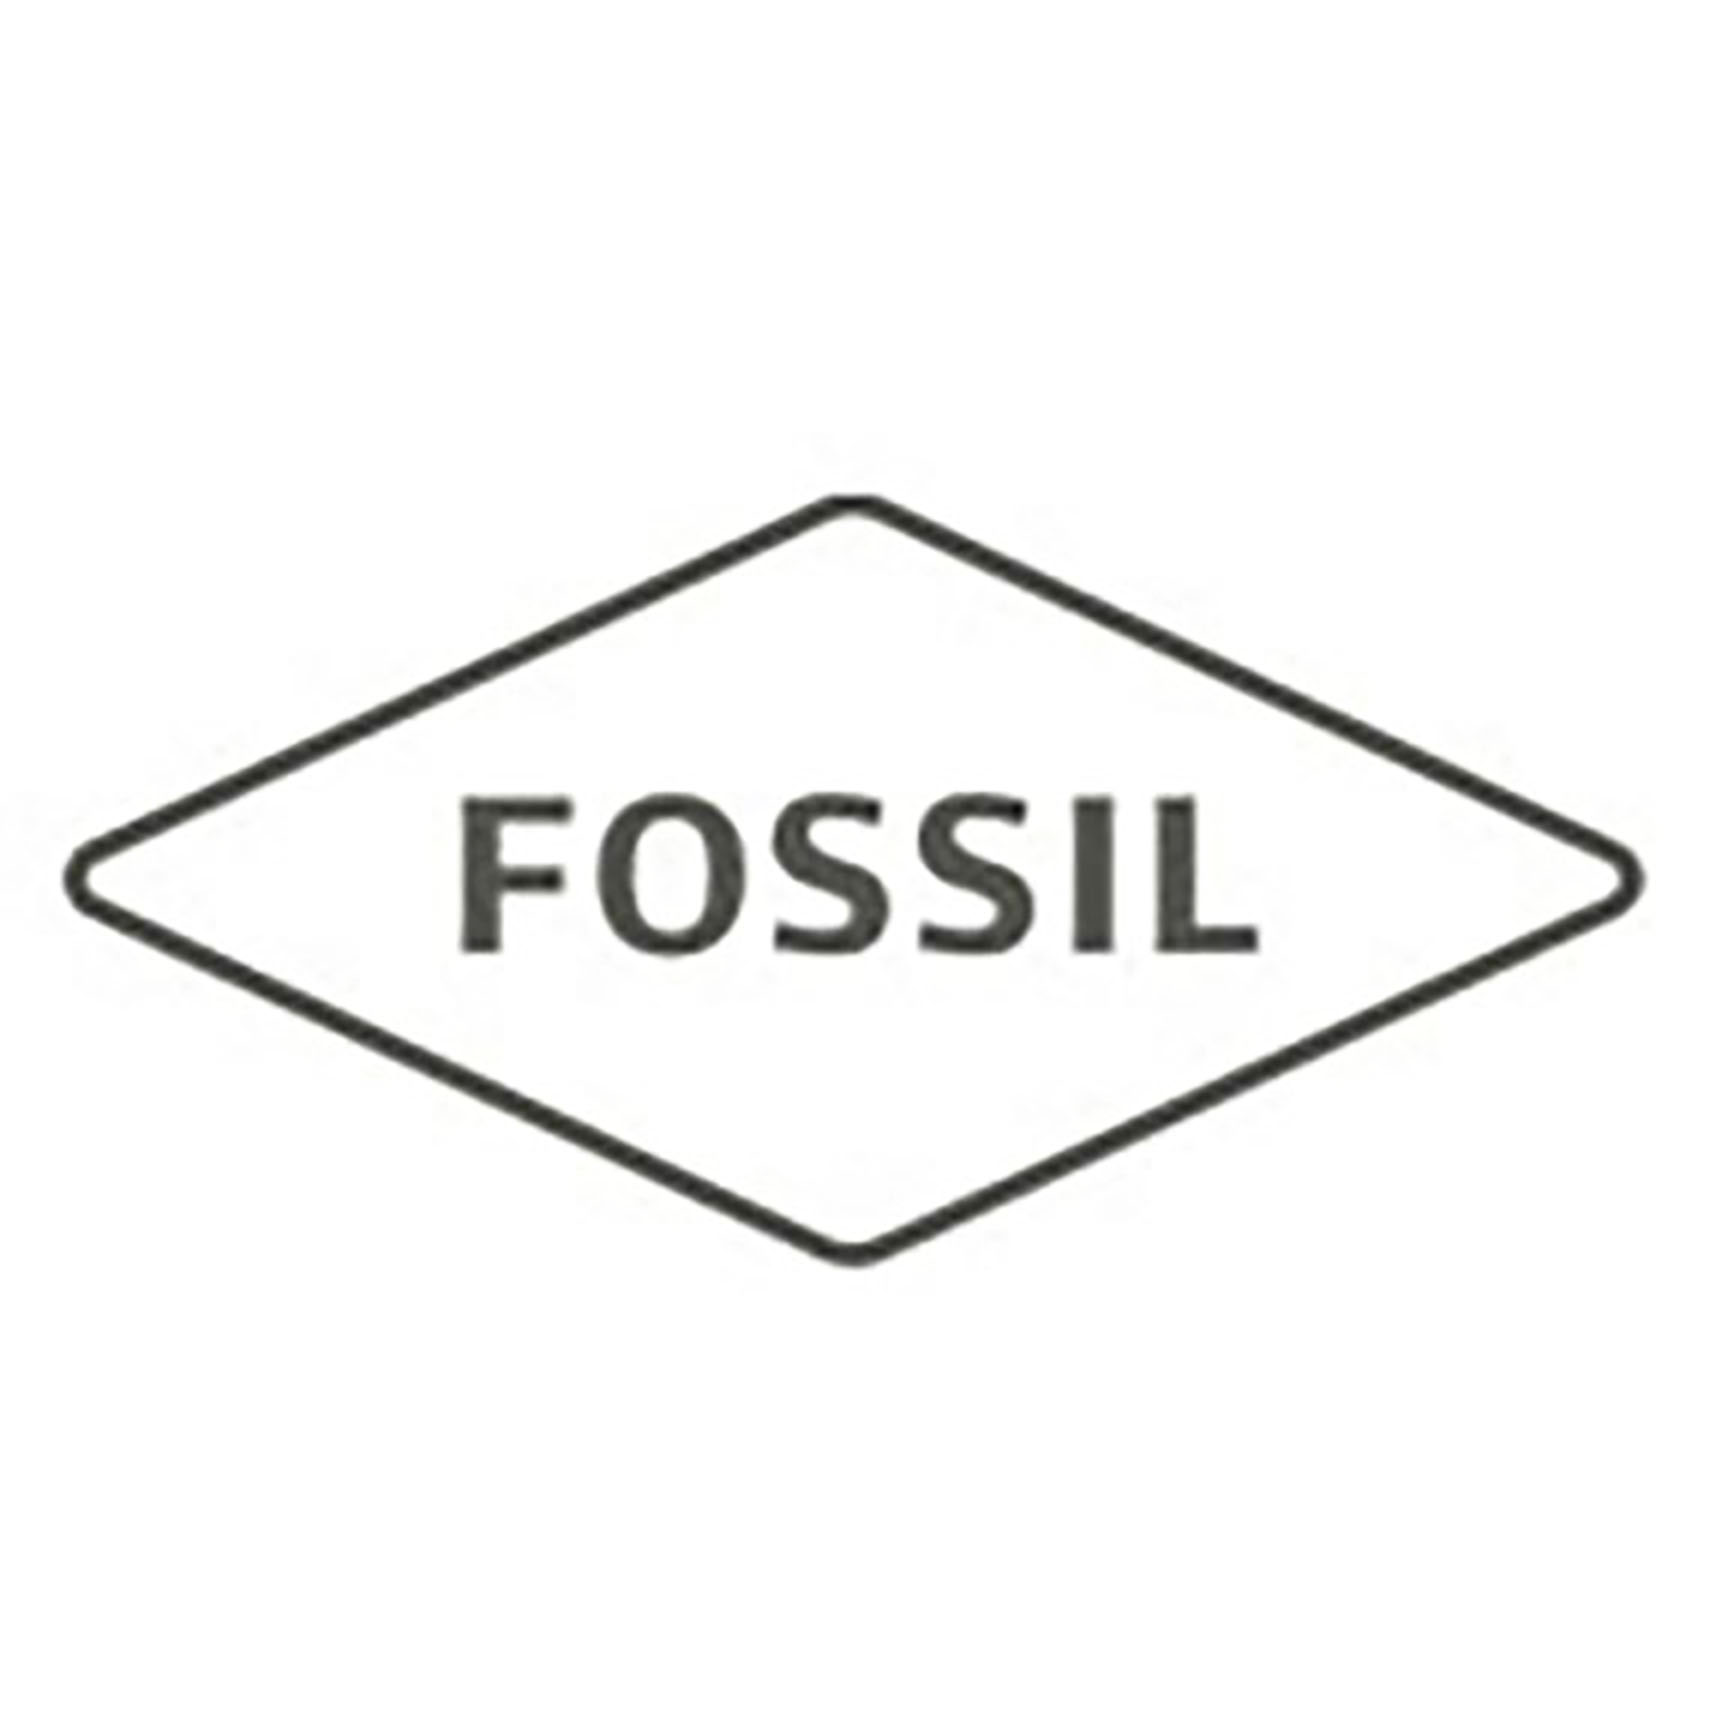 Fossil Group Logo